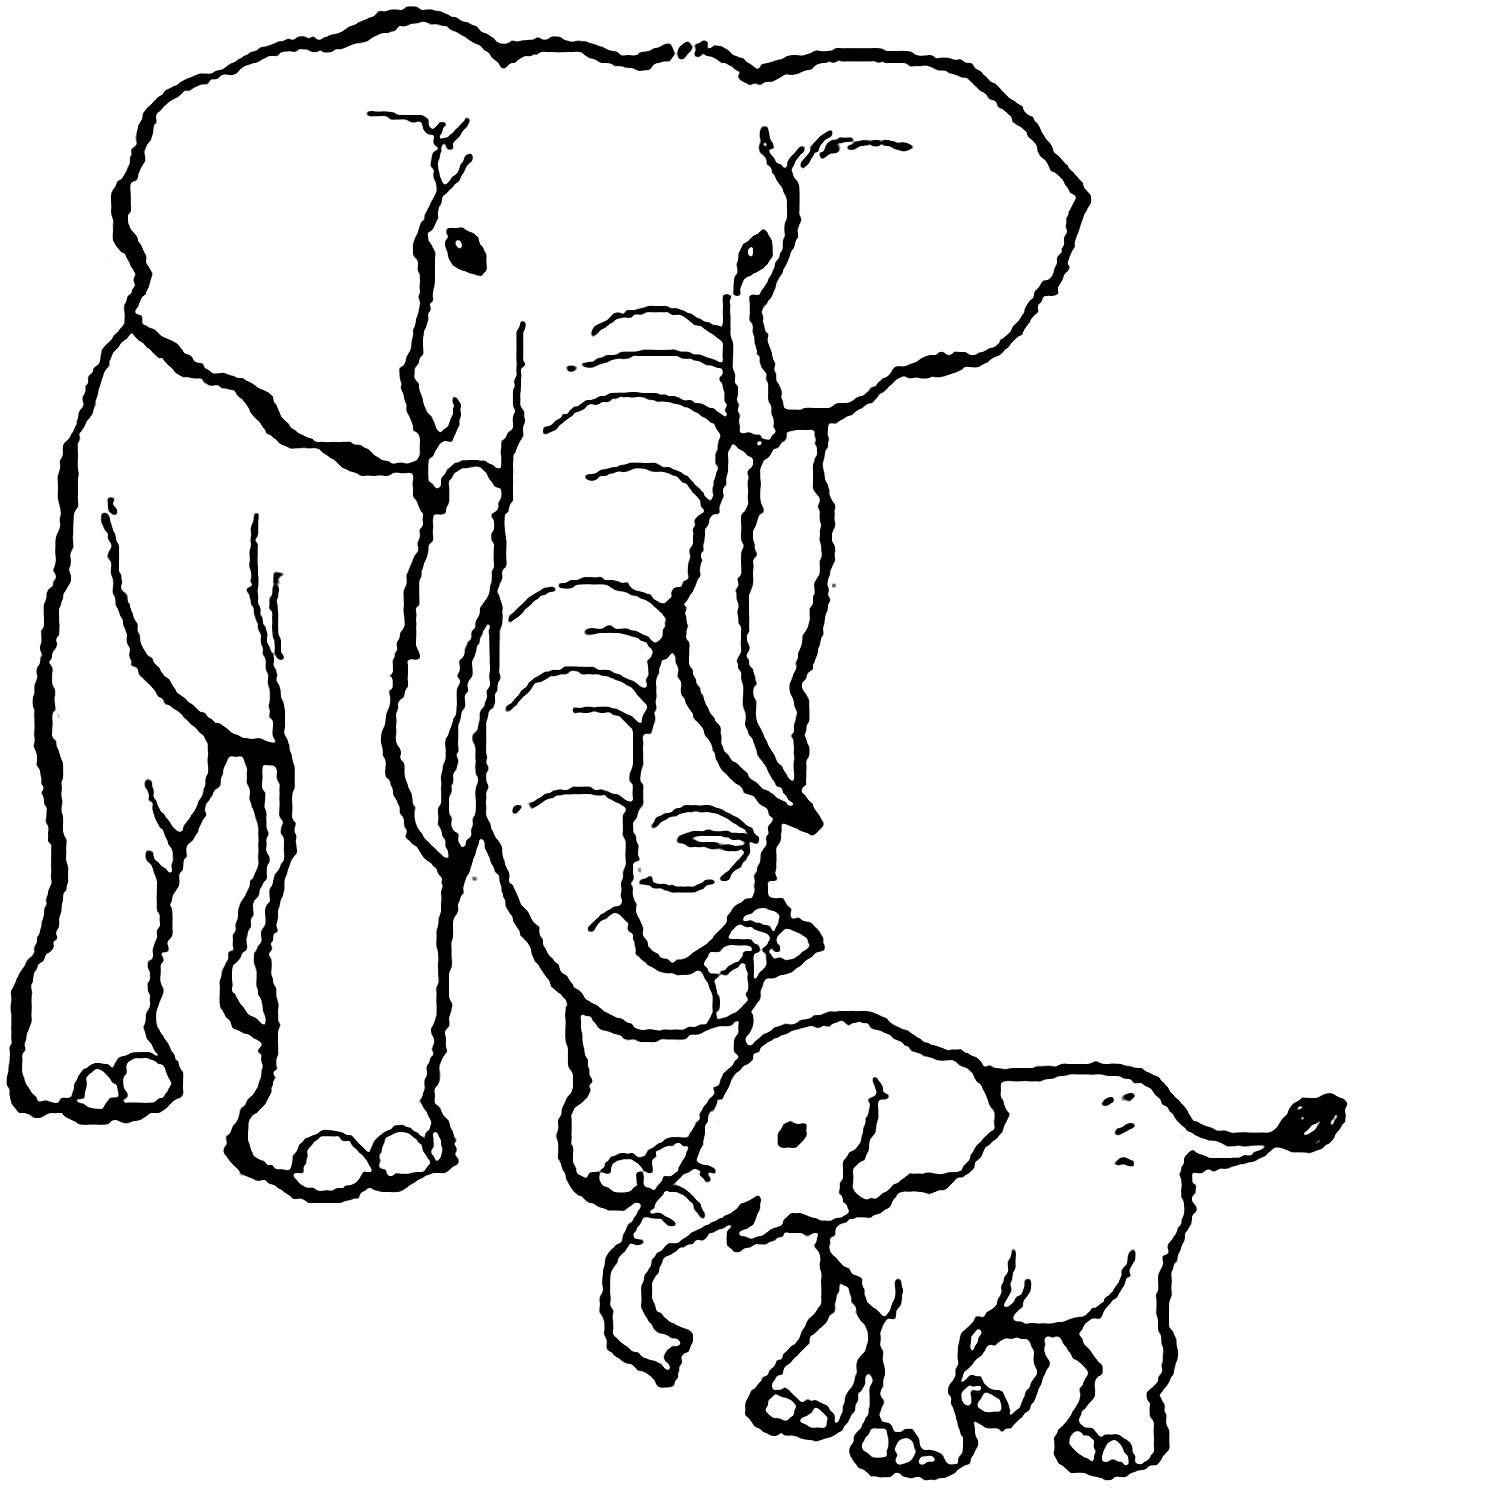 + Elephant Colouring In Pages Background - Super Coloring